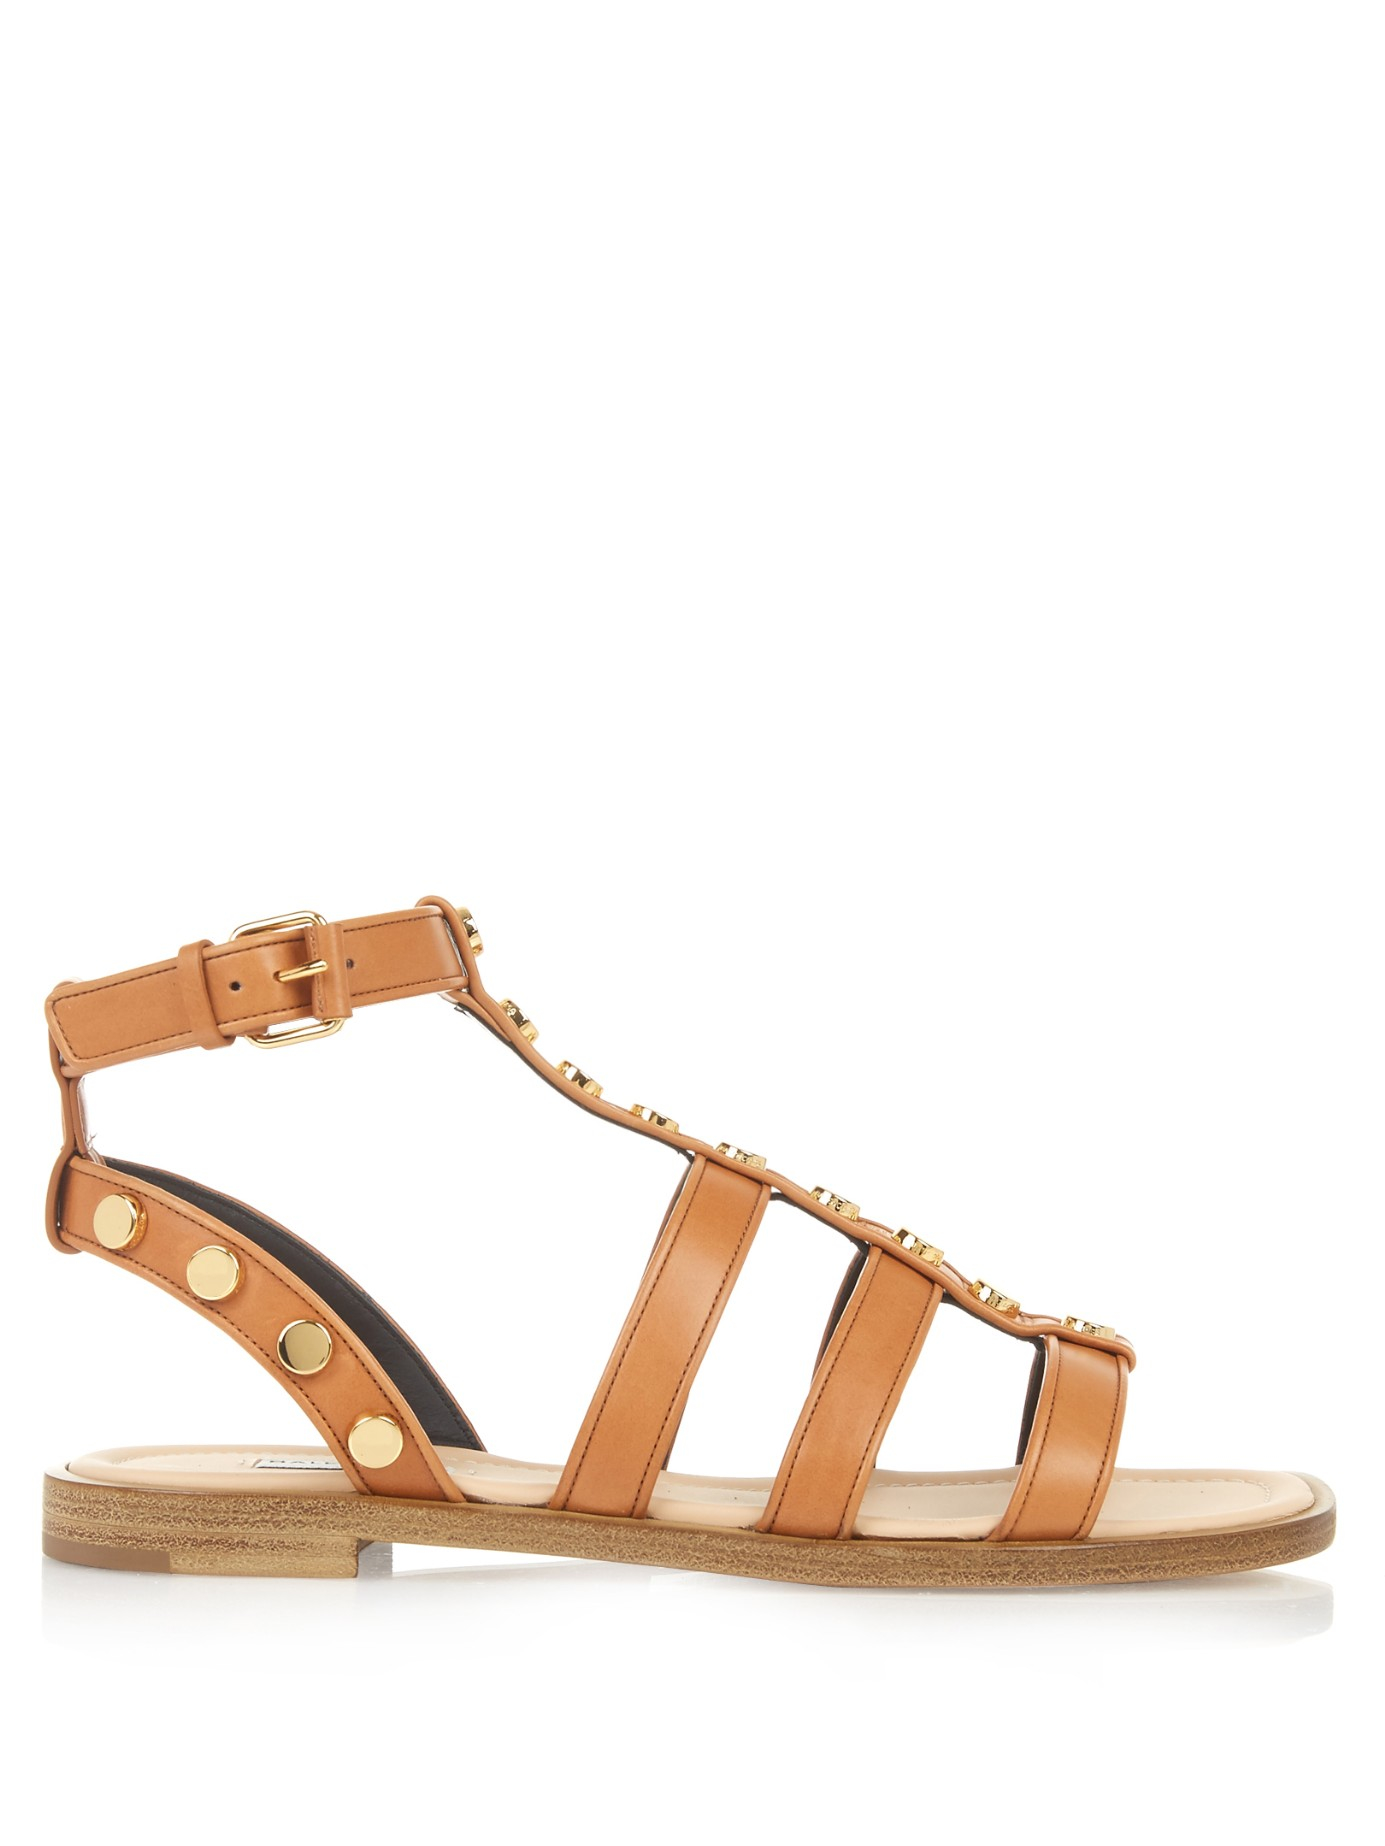 Balenciaga Amp Stud-embellished Leather Gladiator Sandals in Brown - Lyst